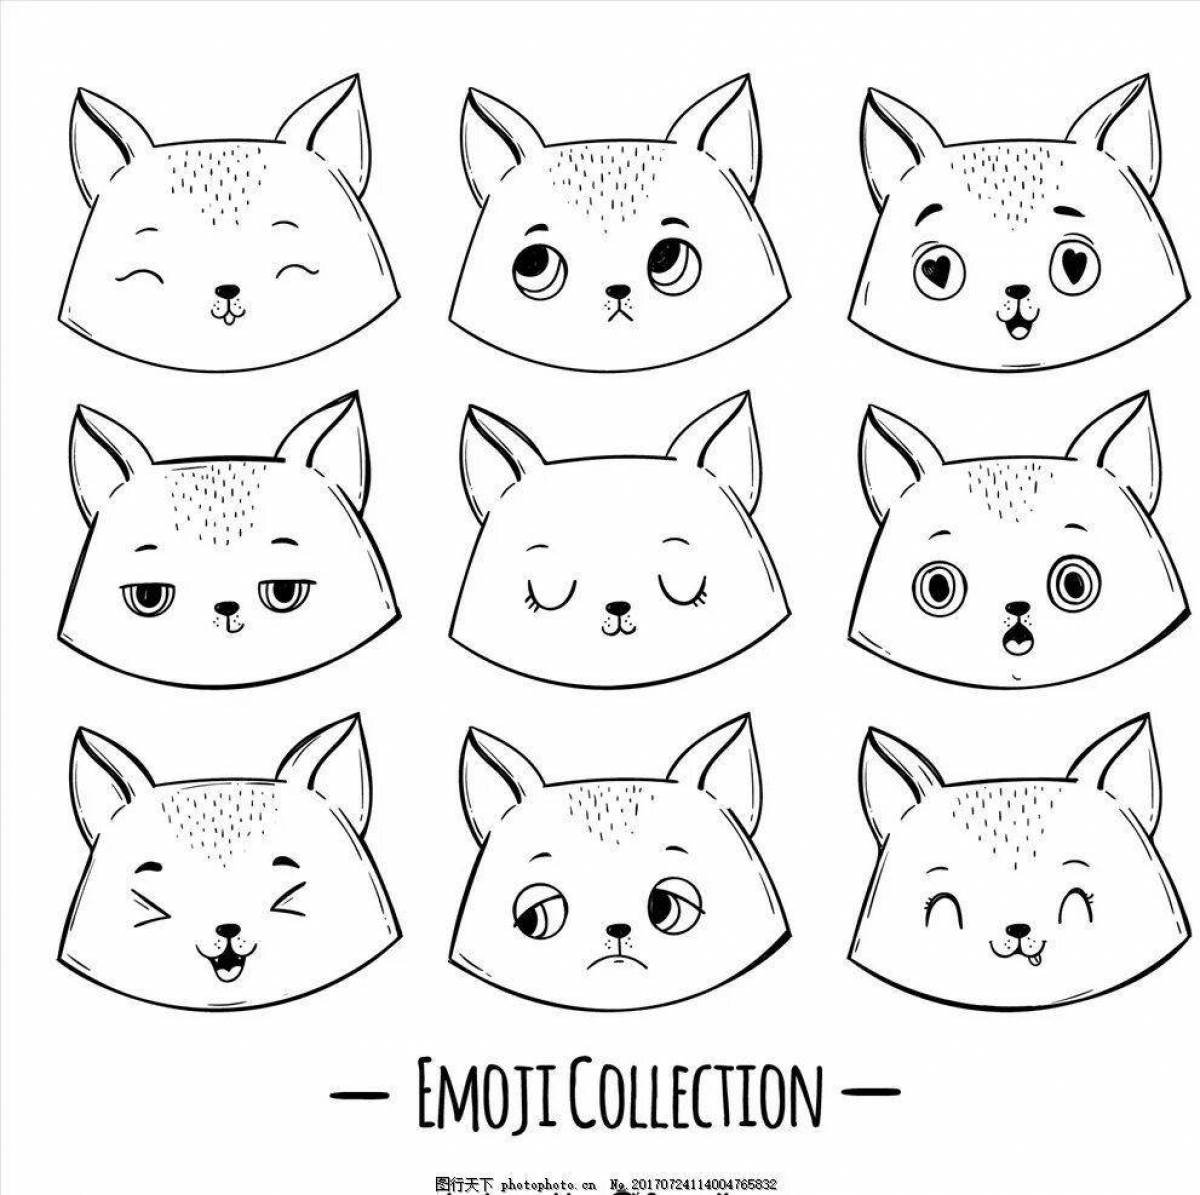 Soft coloring small cats for stickers